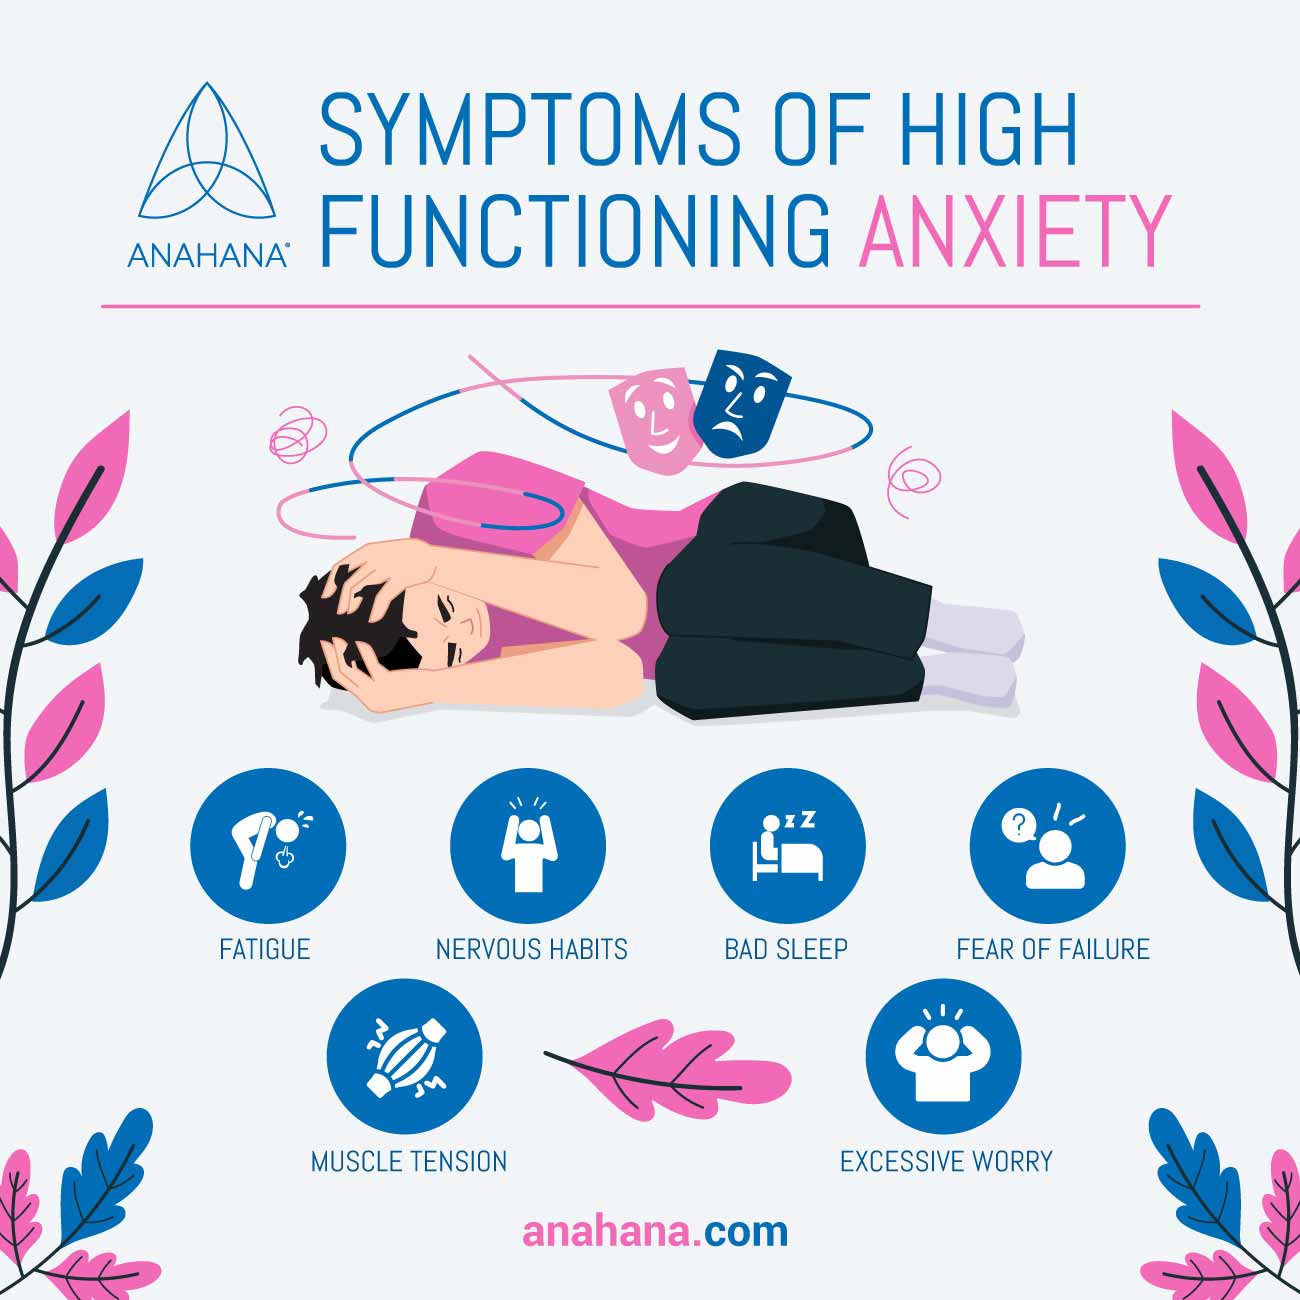 Symptoms of High-functioning anxiety